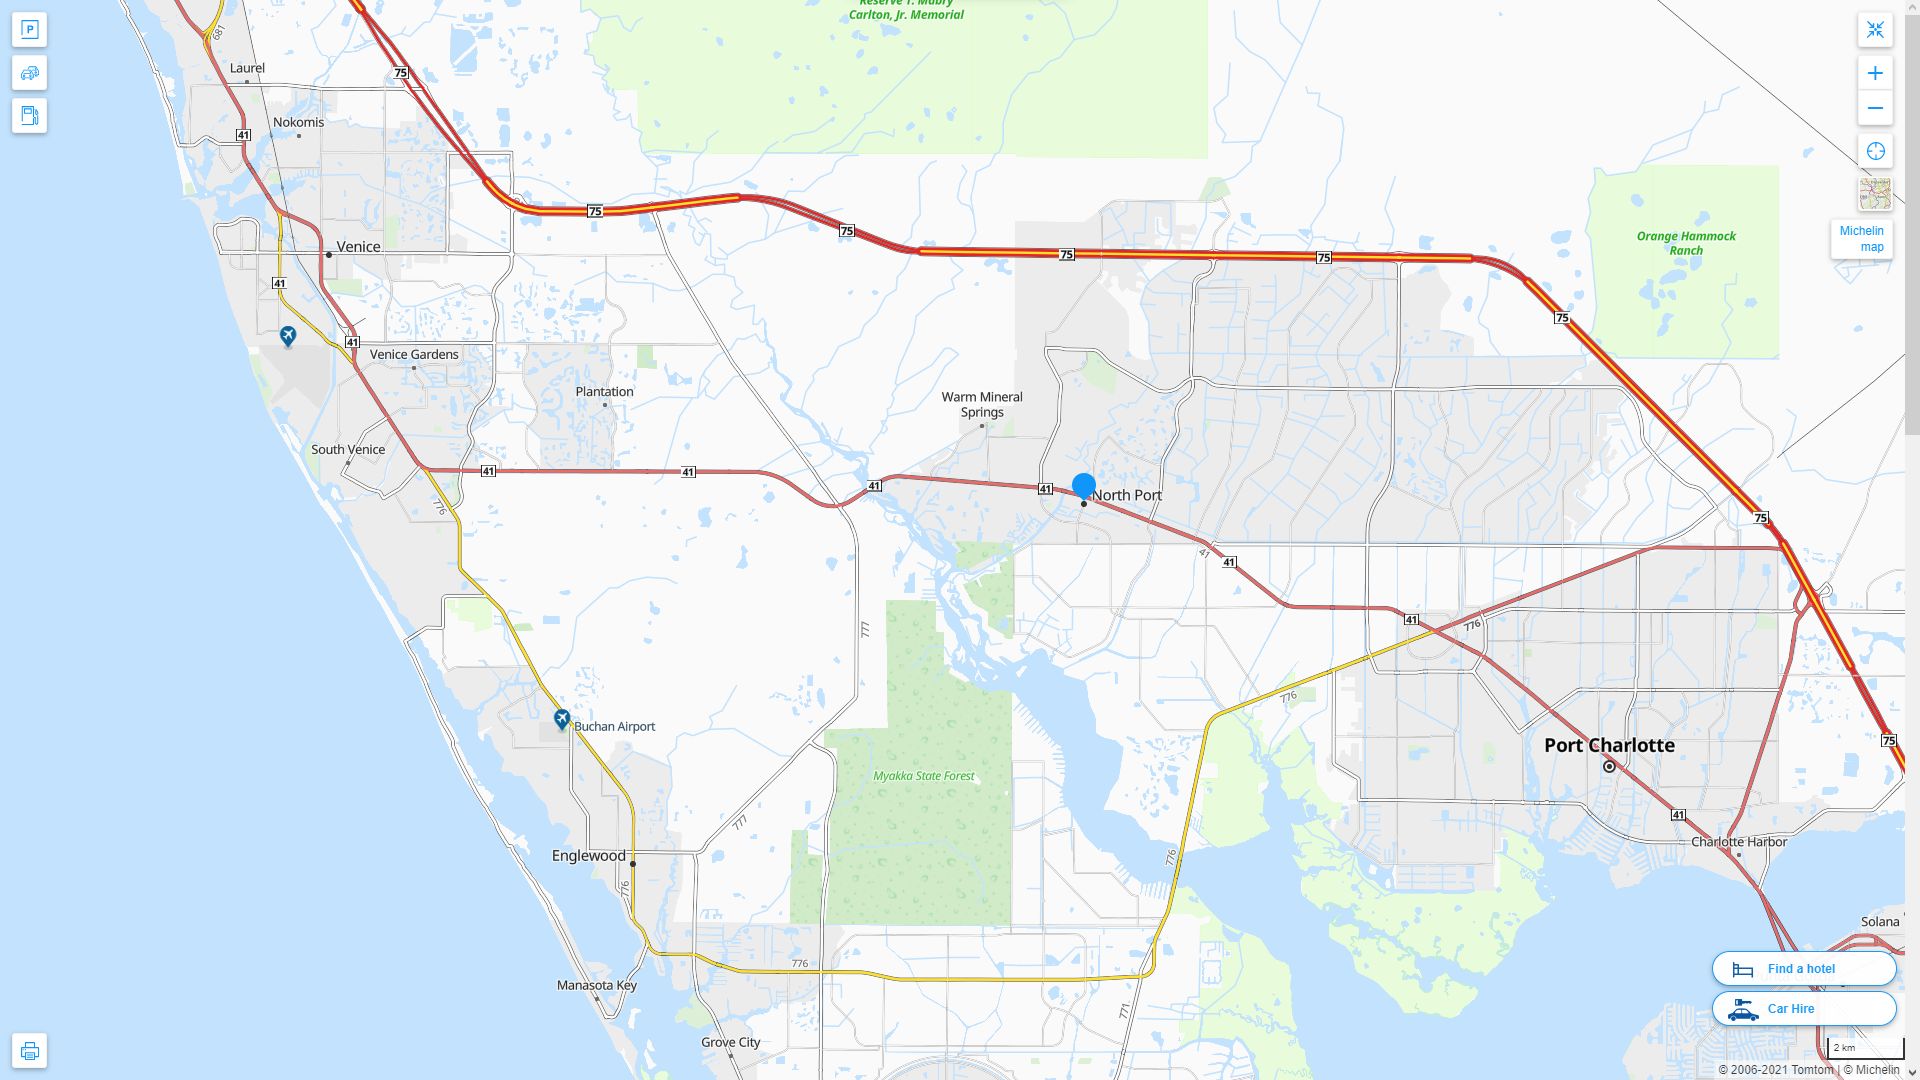 North Port Florida Highway and Road Map